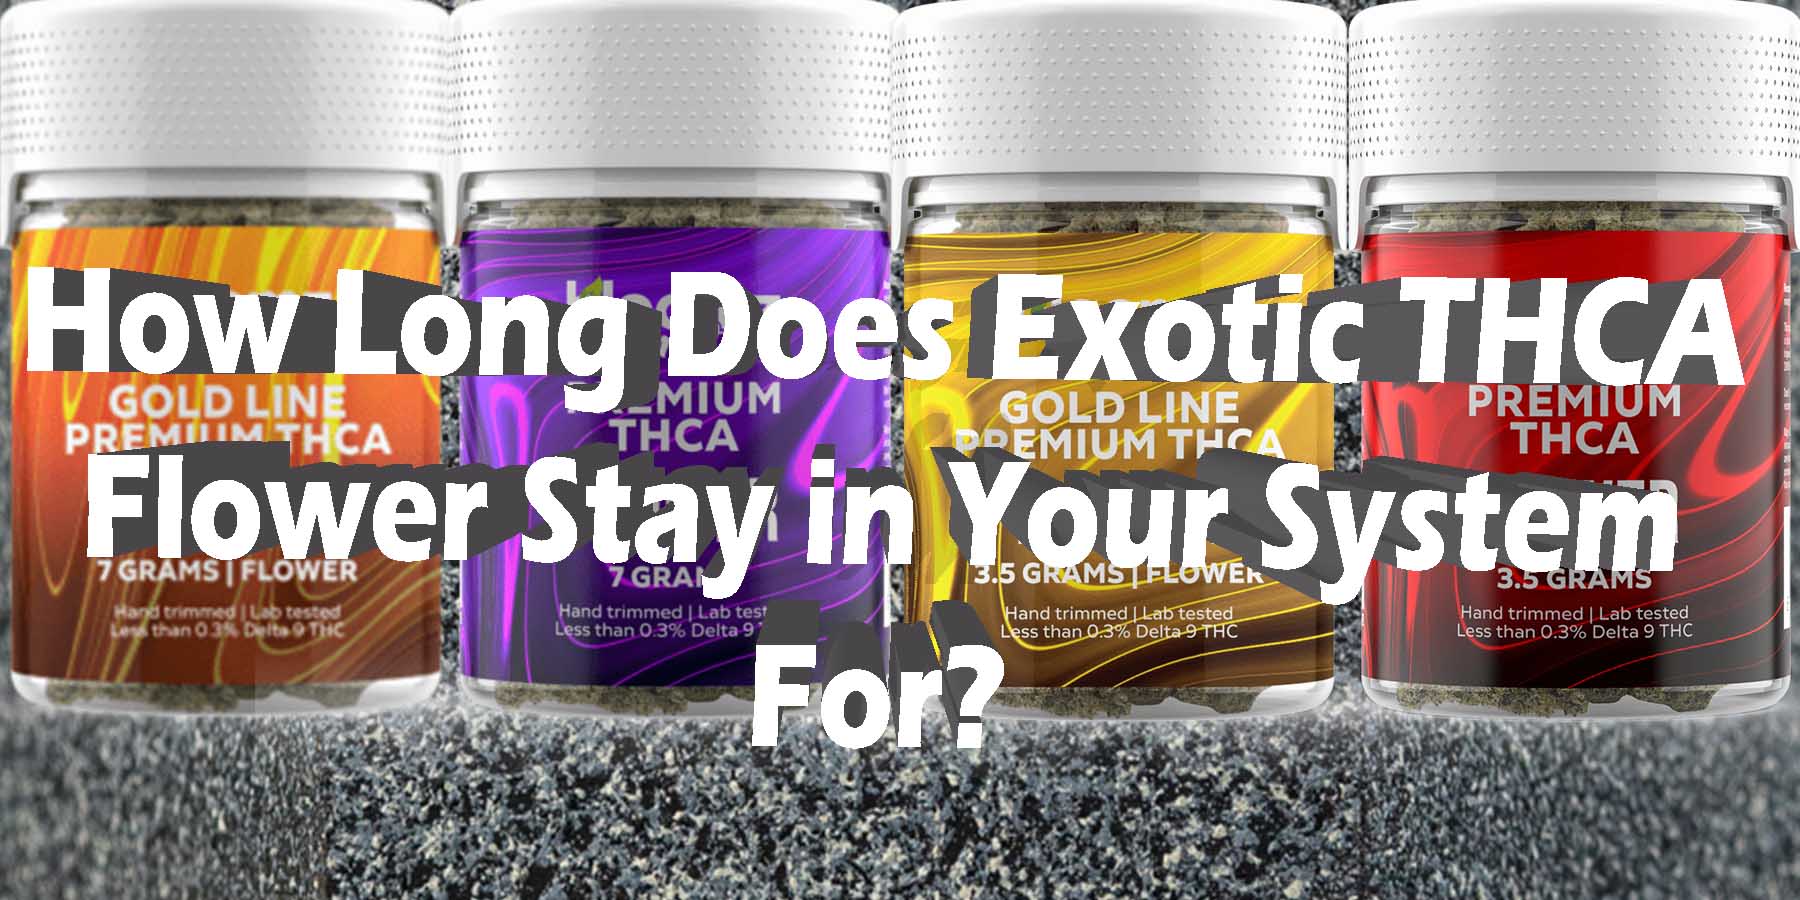 How Long Does Exotic THCA Flower Stay in Your System For BestBrand GoodPrice-GetNearMe LowestCoupon DiscountStore Shoponline VapeCarts Online StrongestSmoke ShopBinoid